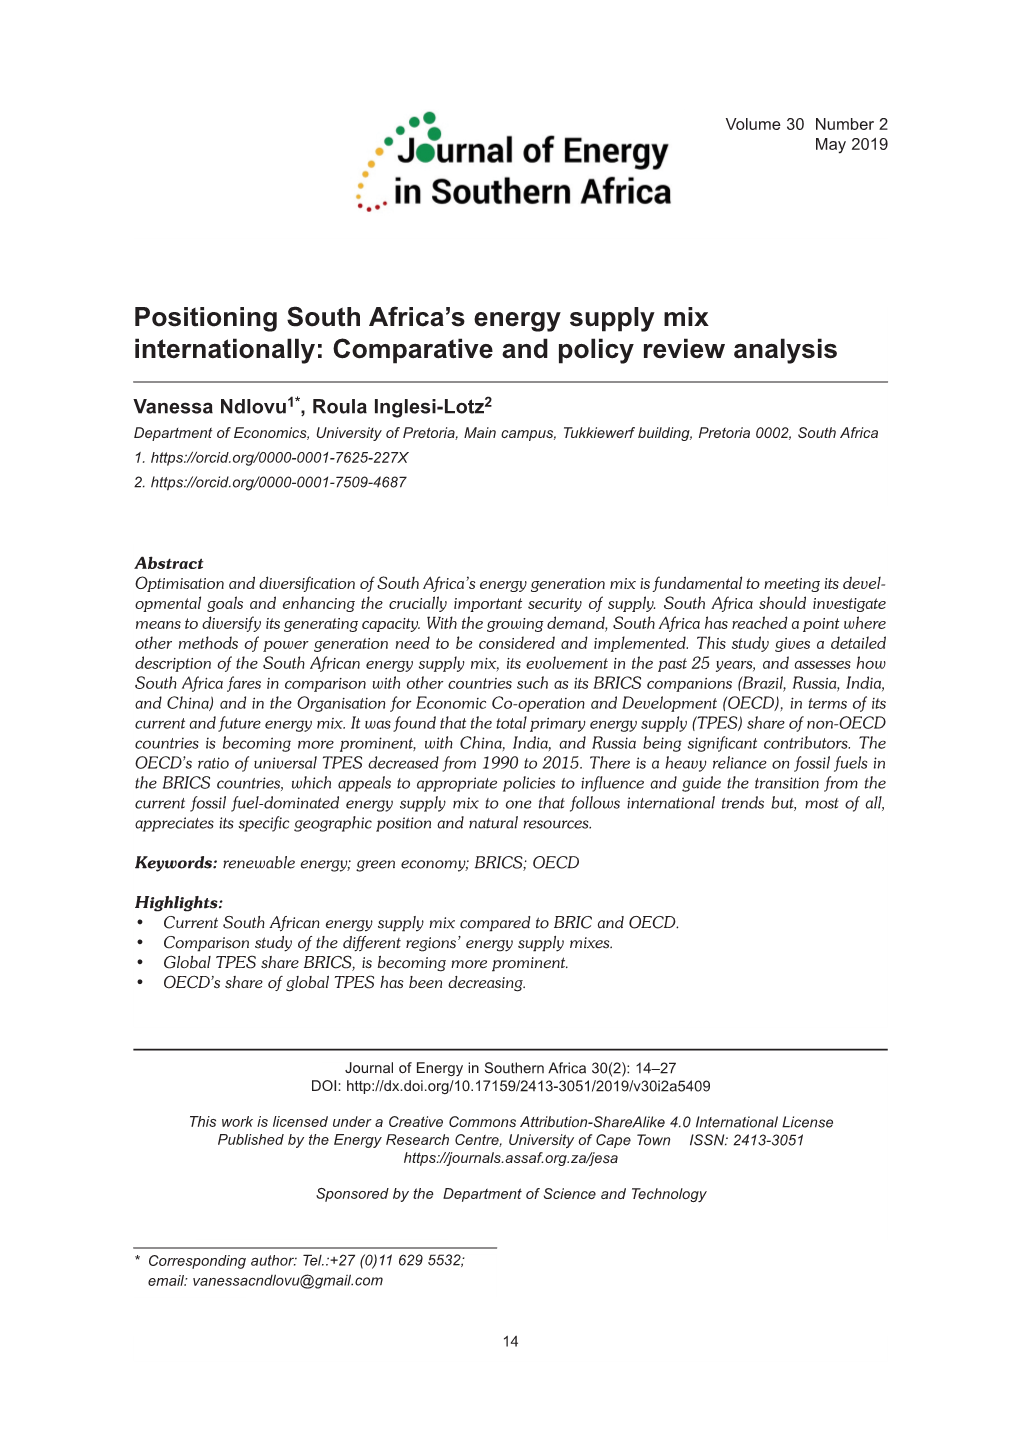 Positioning South Africa's Energy Supply Mix Internationally